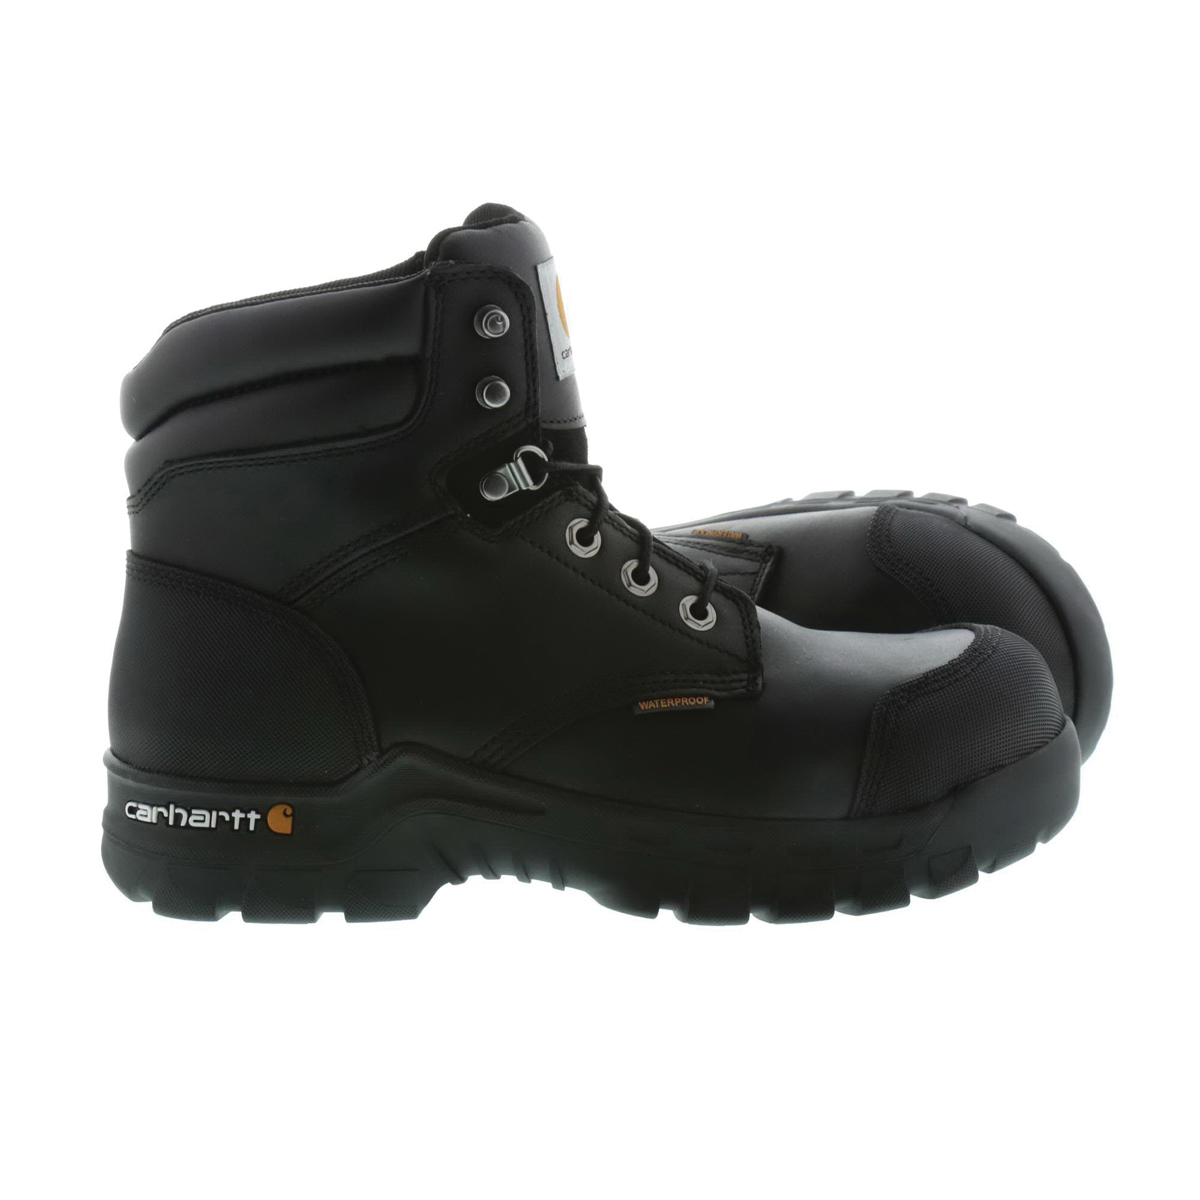 Carhartt CMF6371-BOD-12M Boots, 12, M W, Black Oil Tanned, Leather Upper, Lace-Up Closure - 3